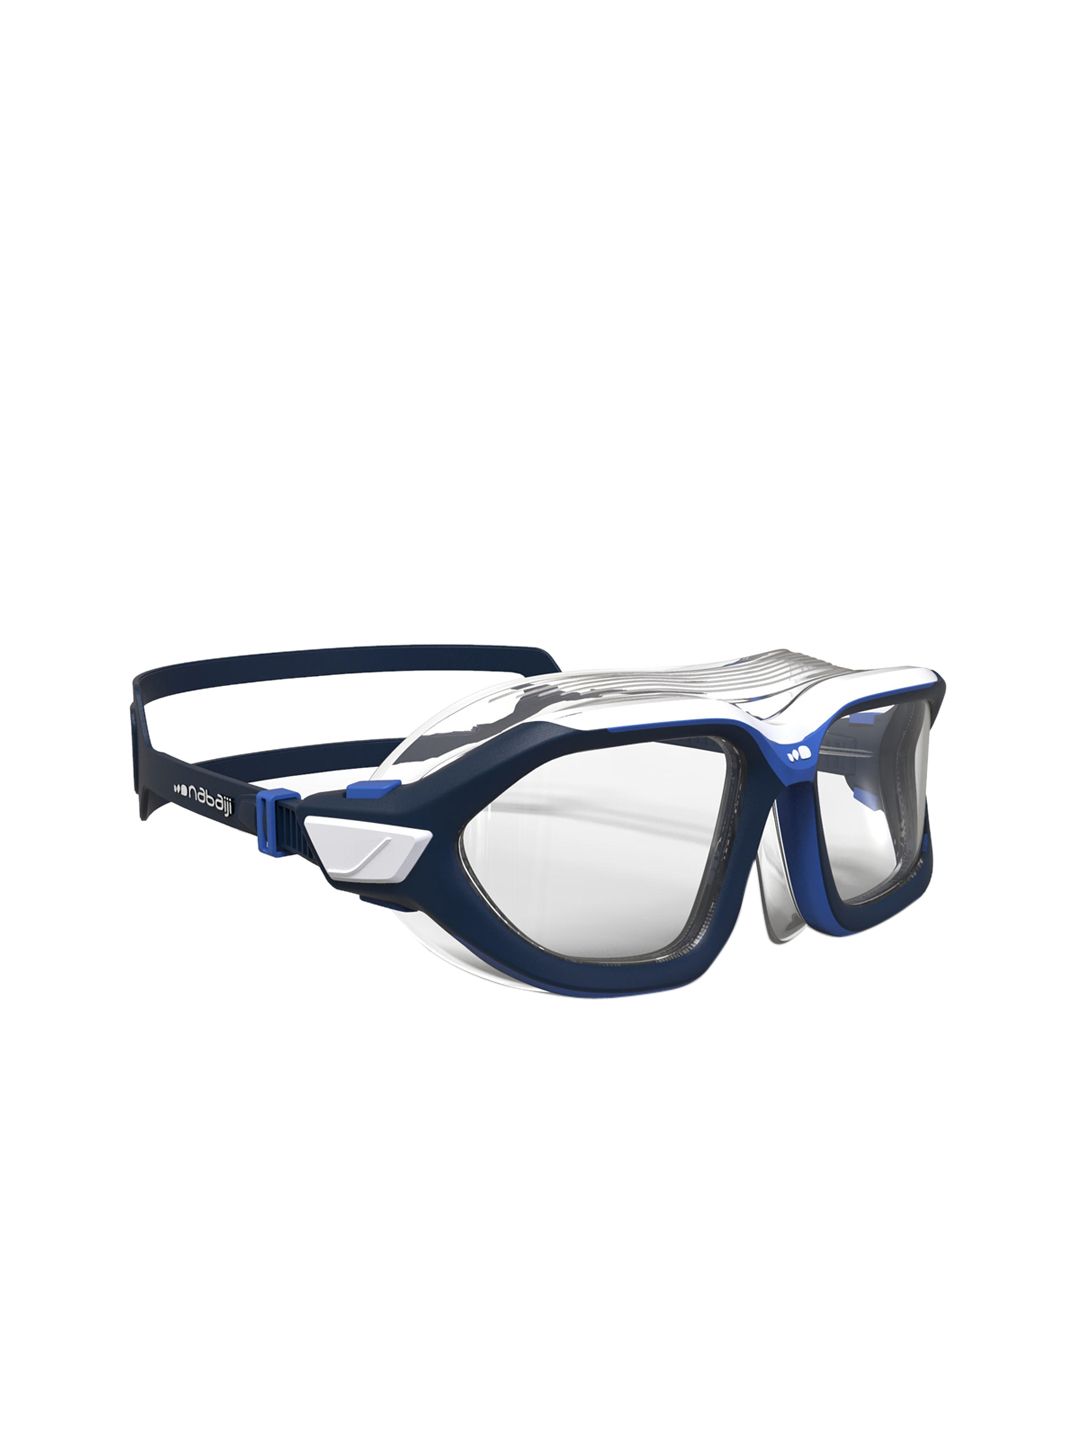 Nabaiji By Decathlon Navy Blue & White Active Swimming Pool Mask Price in India